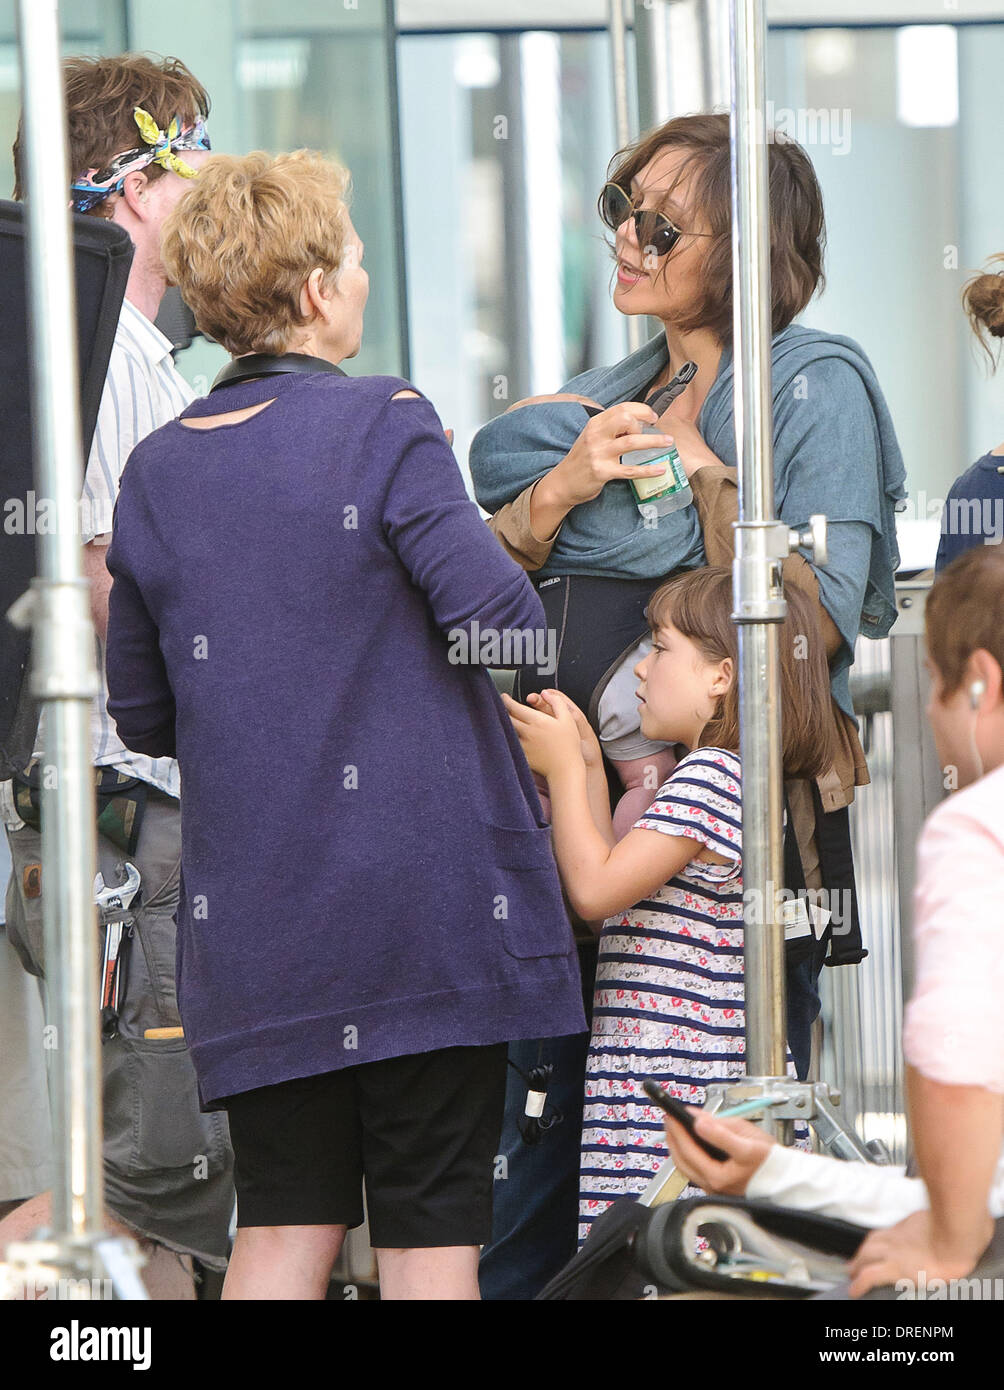 Maggie Gyllenhaal and her daughters visit her mother Naomi Foner on the set of 'Very Good Girls.' New York City, USA - 31.07.12 Stock Photo